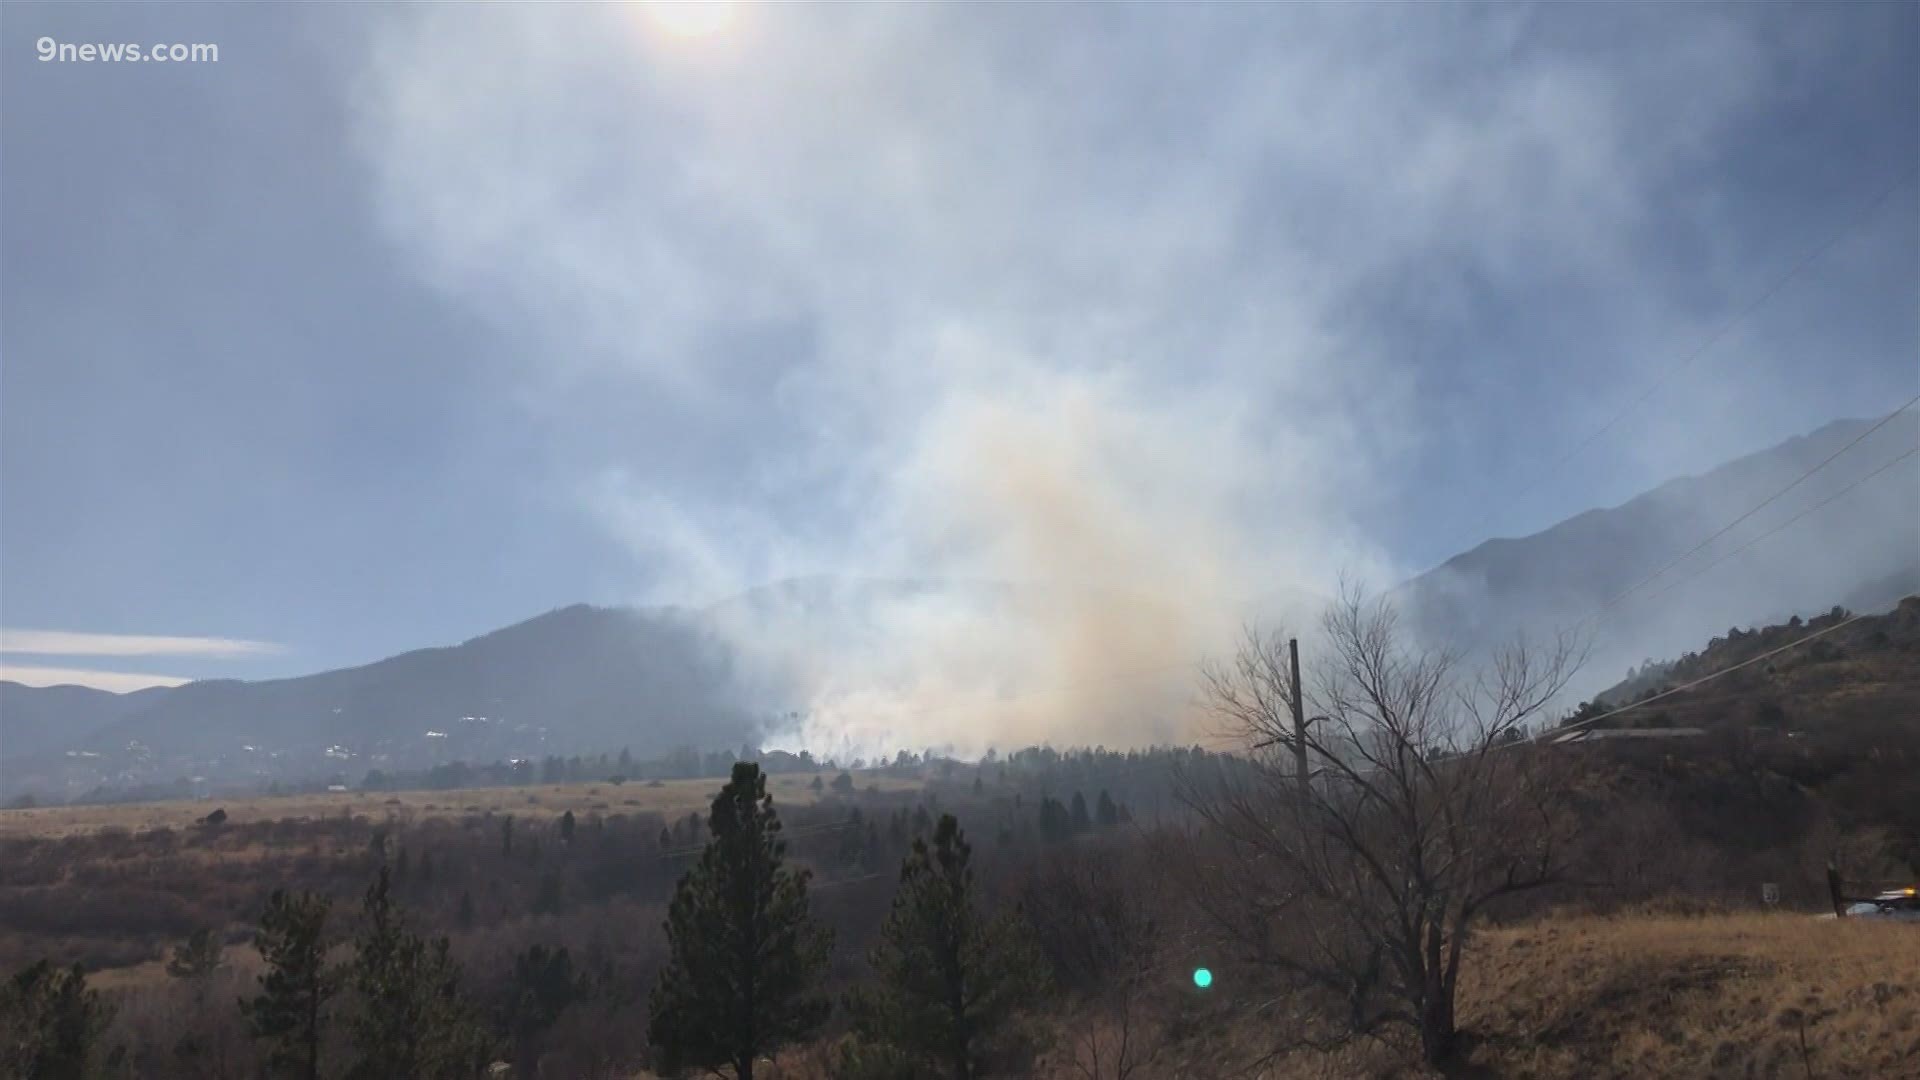 The fire forced the evacuations of about 235 homes.